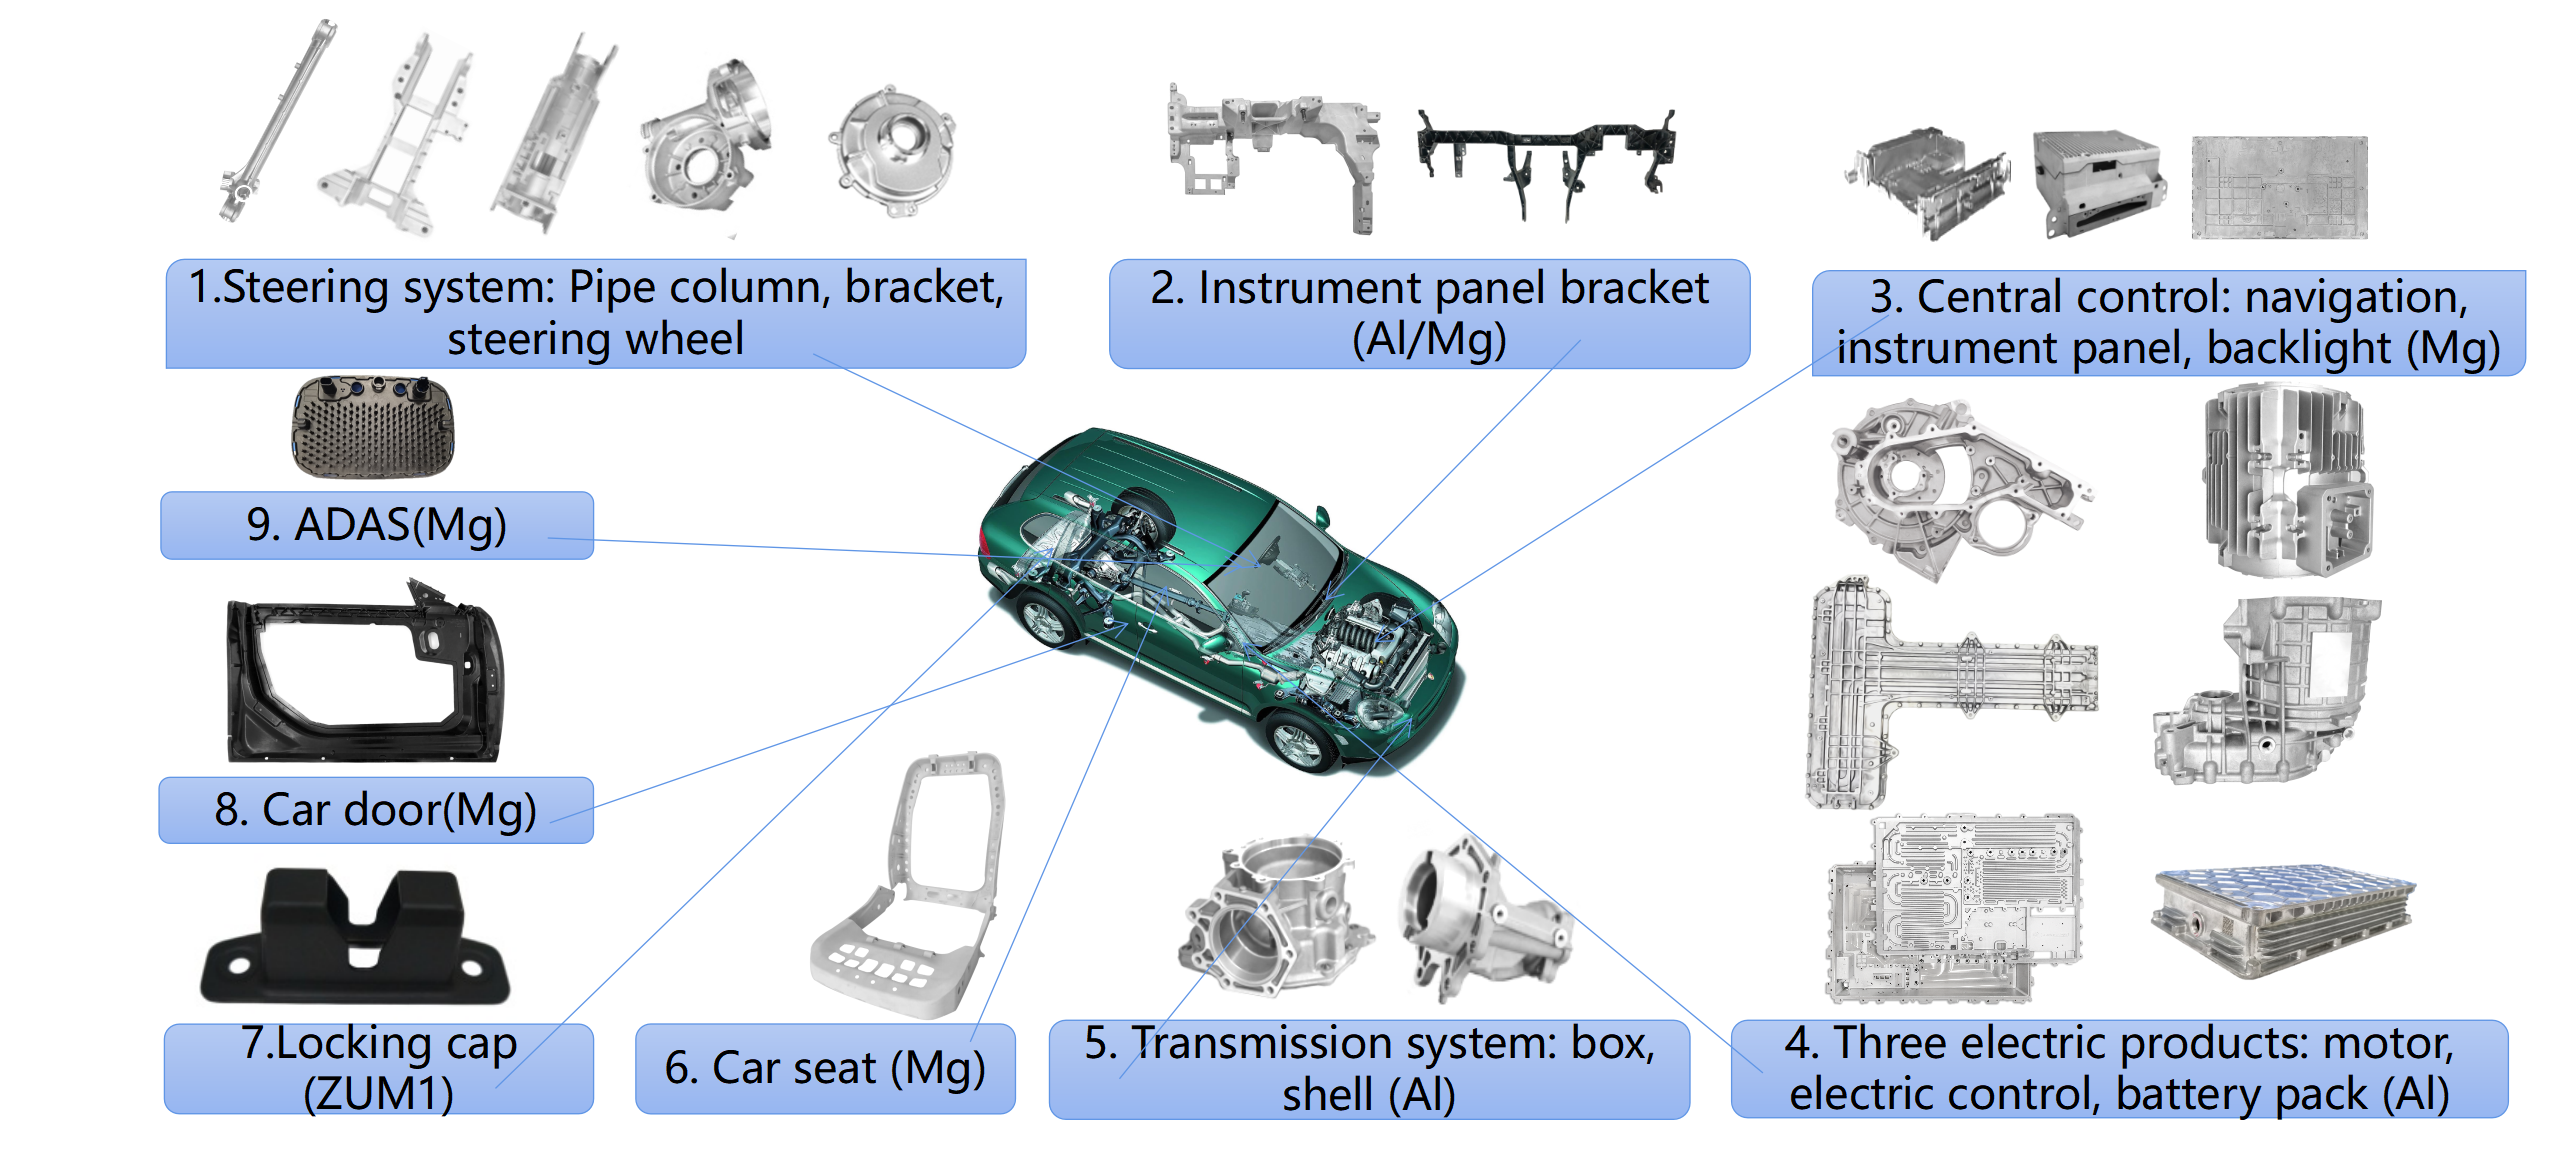 Automobile Field Powered by Precision MIM Manufacturing from Trustworthy and Reputable Suppliers and Manufacturers